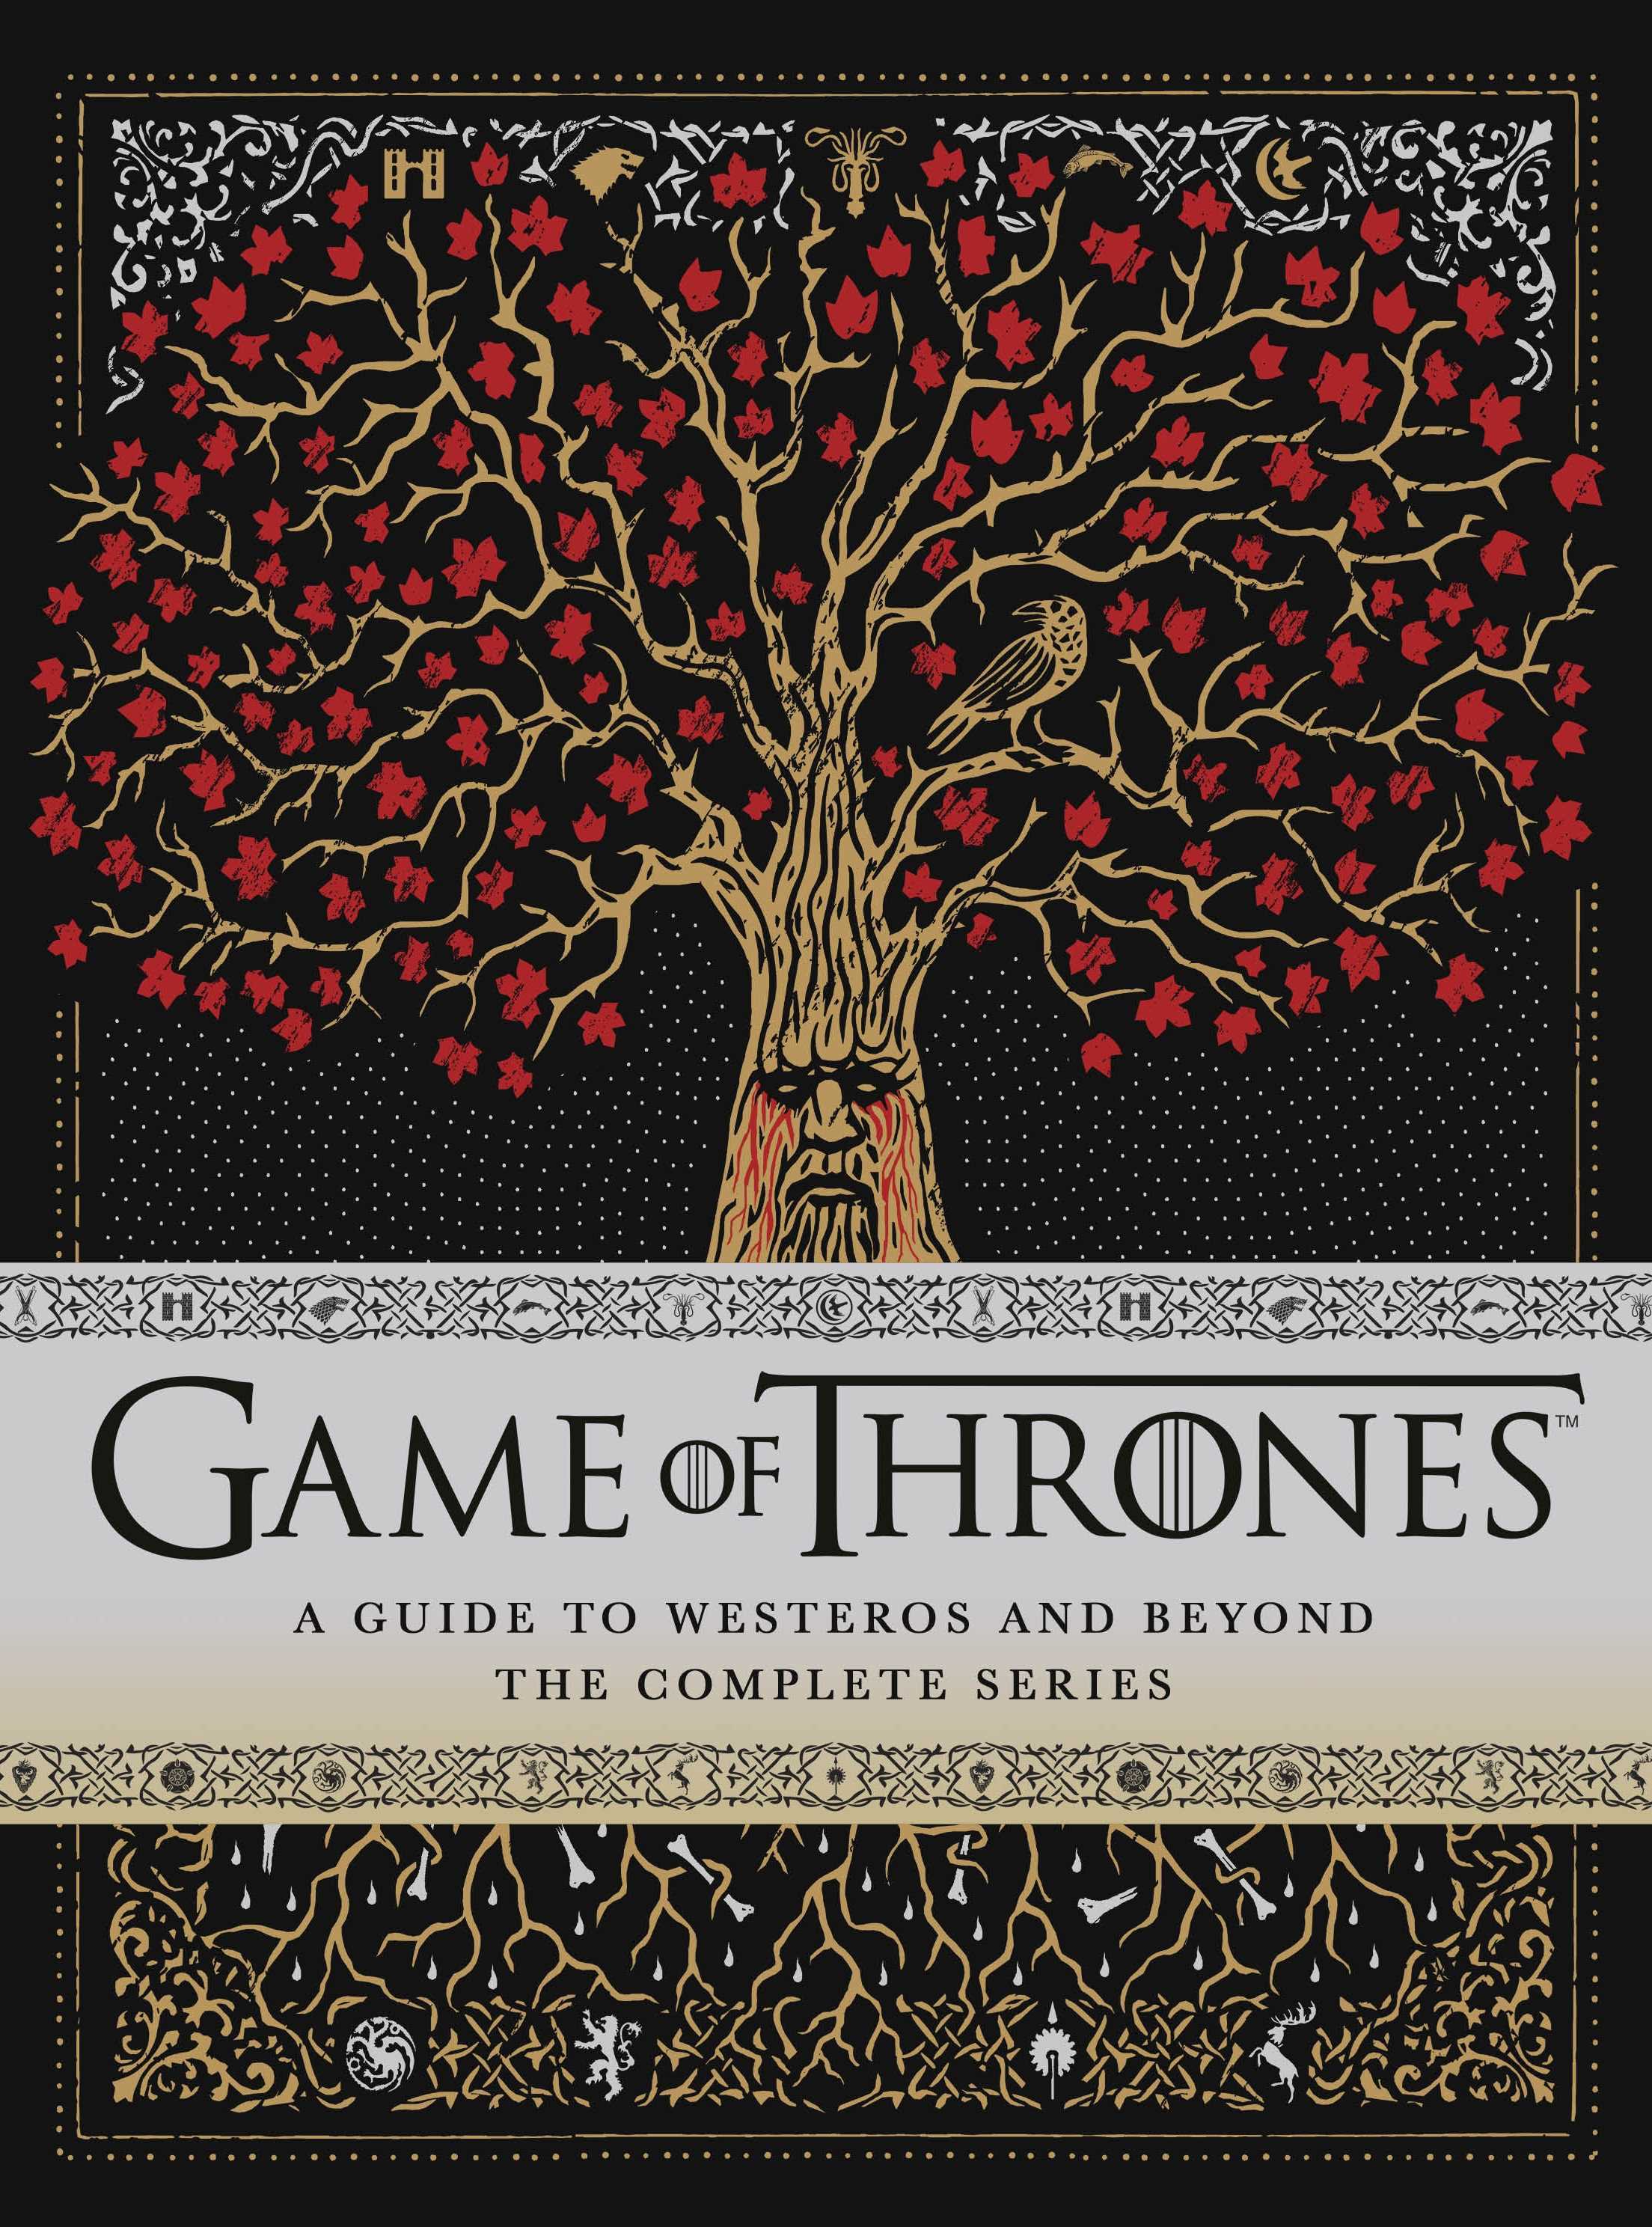 A Guide to Westeros and Beyond: The Complete Series